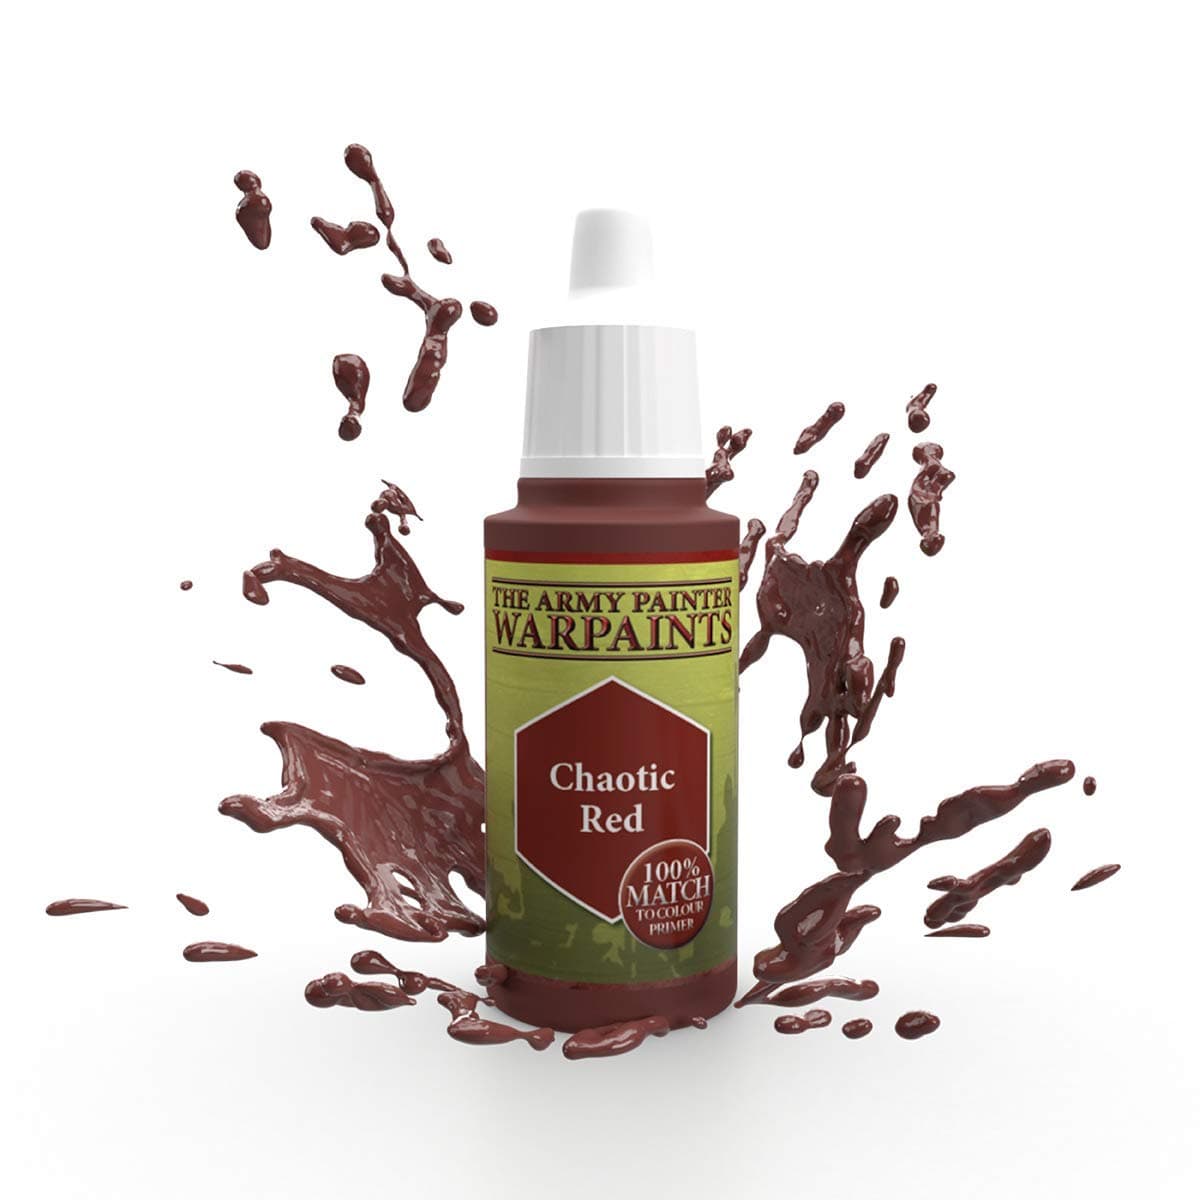 The Army Painter Accessories The Army Painter Warpaints: Chaotic Red 18ml